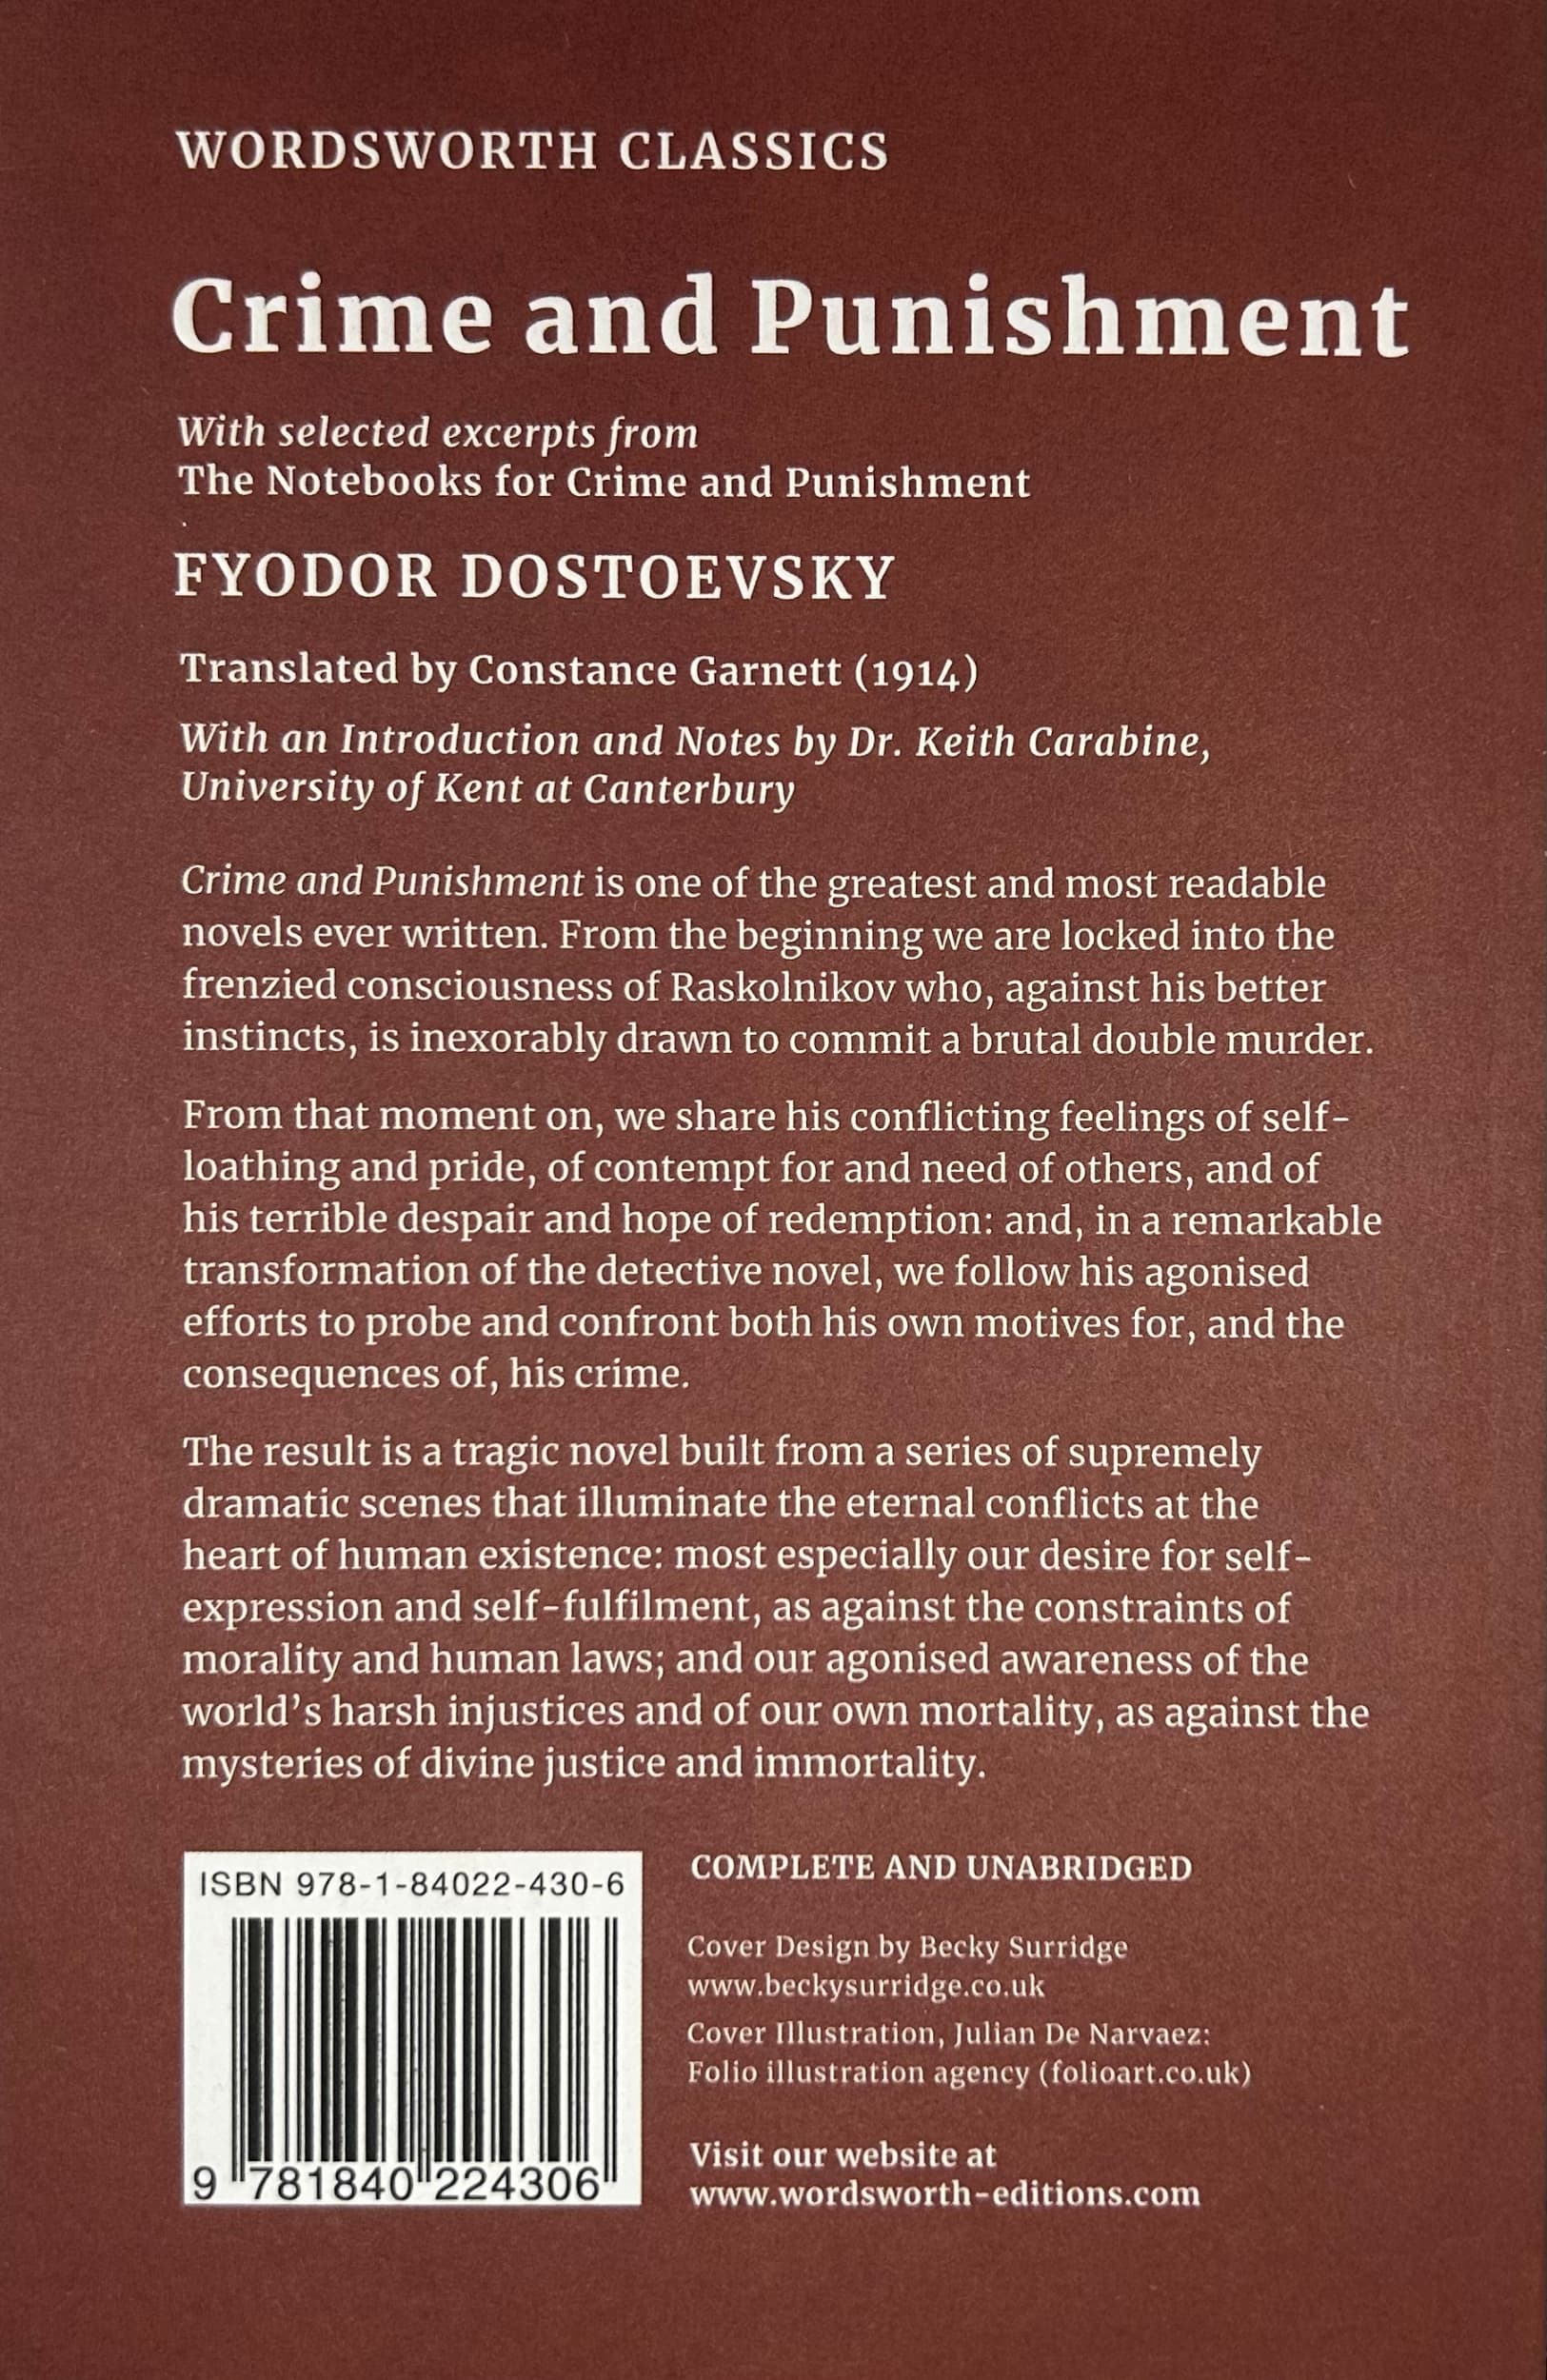 Crime and Punishment - Back cover